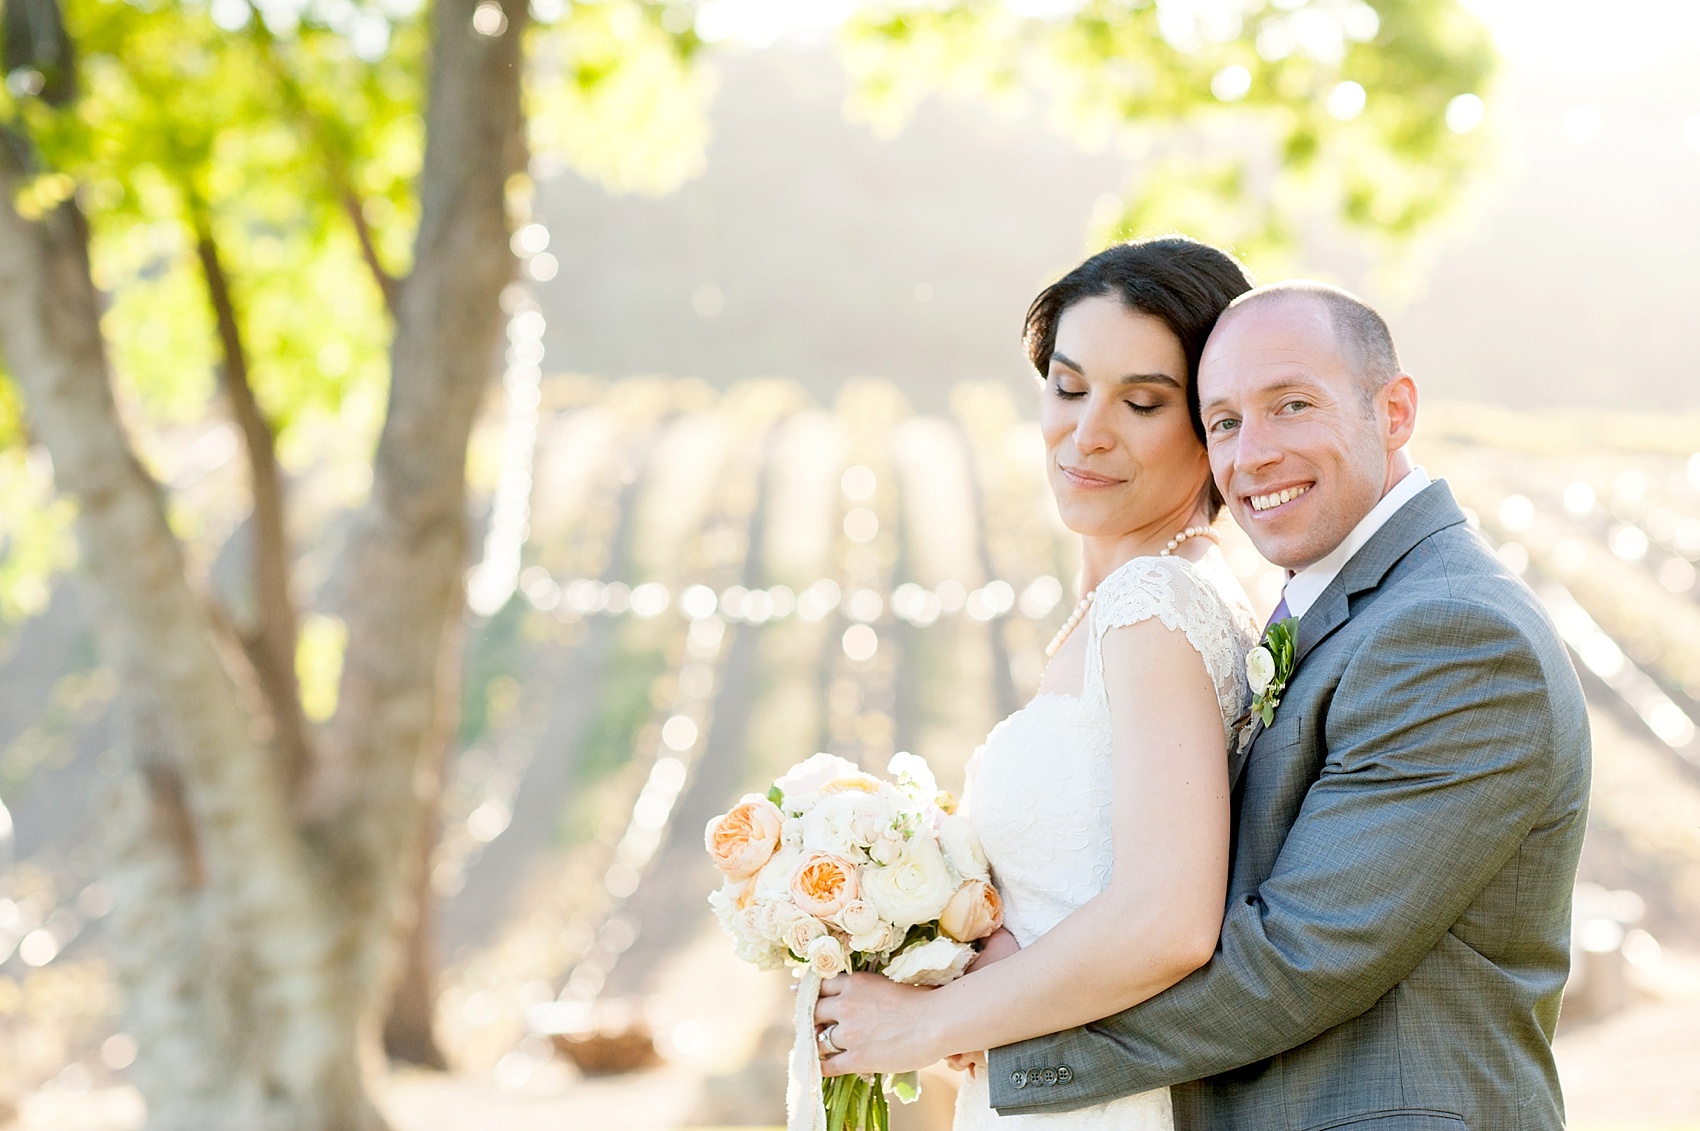 Spring vineyard elopement with Mikkel Paige, destination wedding photographer. Held at HammerSky Vineyard, south of San Francisco. The bride in a Ramona Keveza Legends gown.